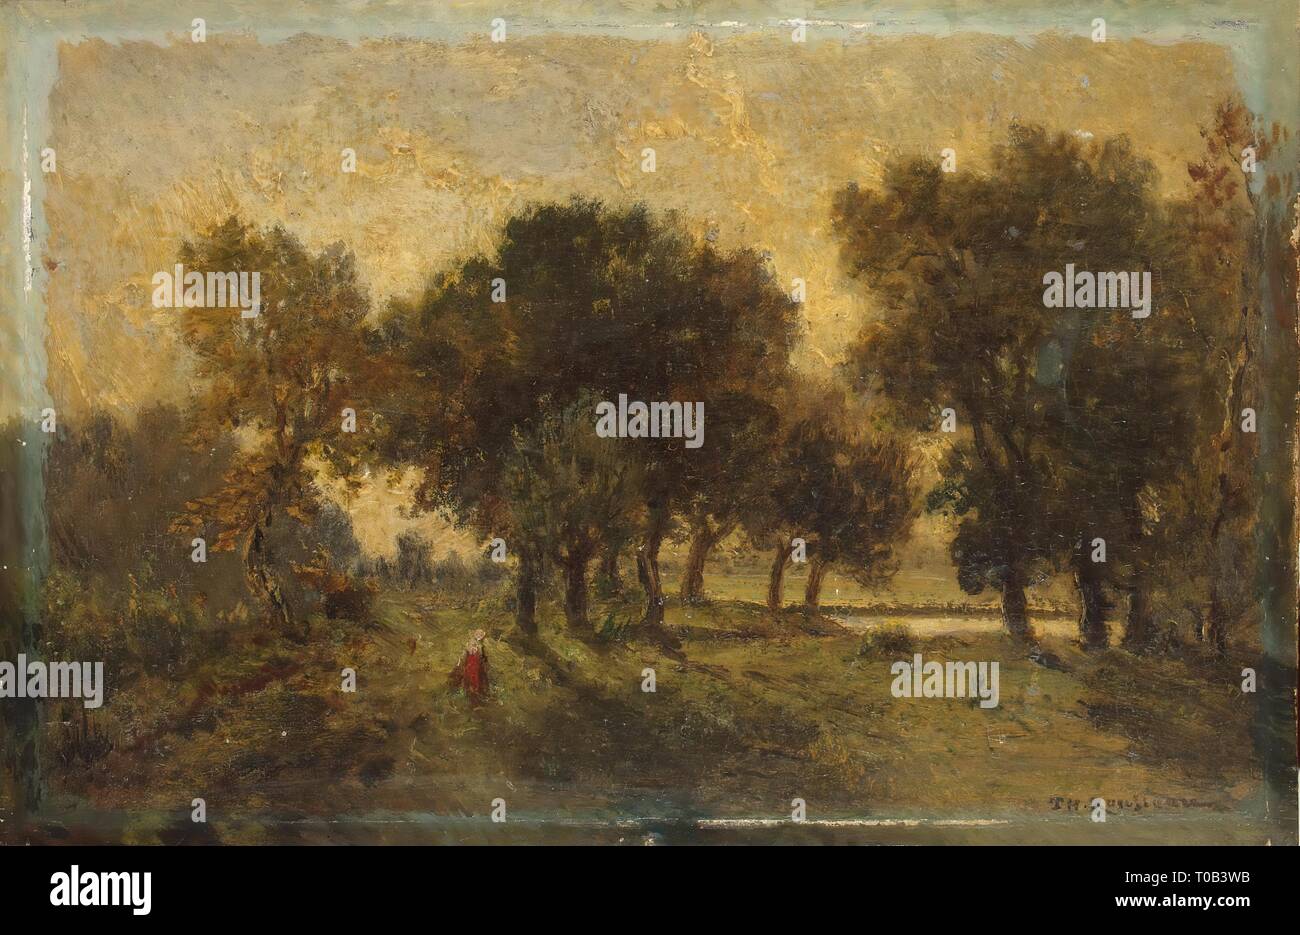 'Landscape'. France, Mid-19th century. Dimensions: 17x25,5 cm. Museum: State Hermitage, St. Petersburg. Author: THEODORE ROUSSEAU. Stock Photo